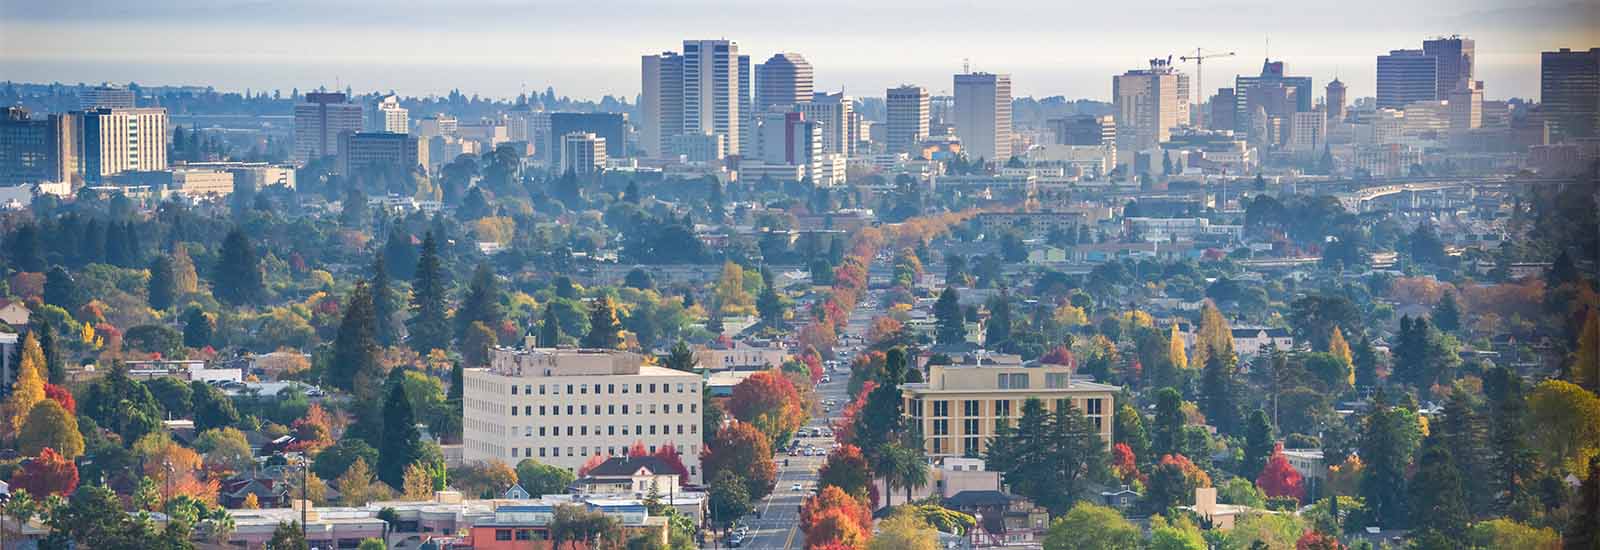 Aerial view of a major street in Oakland surrounded by trees, homes, and commercial buildings. Taller buildings are visible in the background.